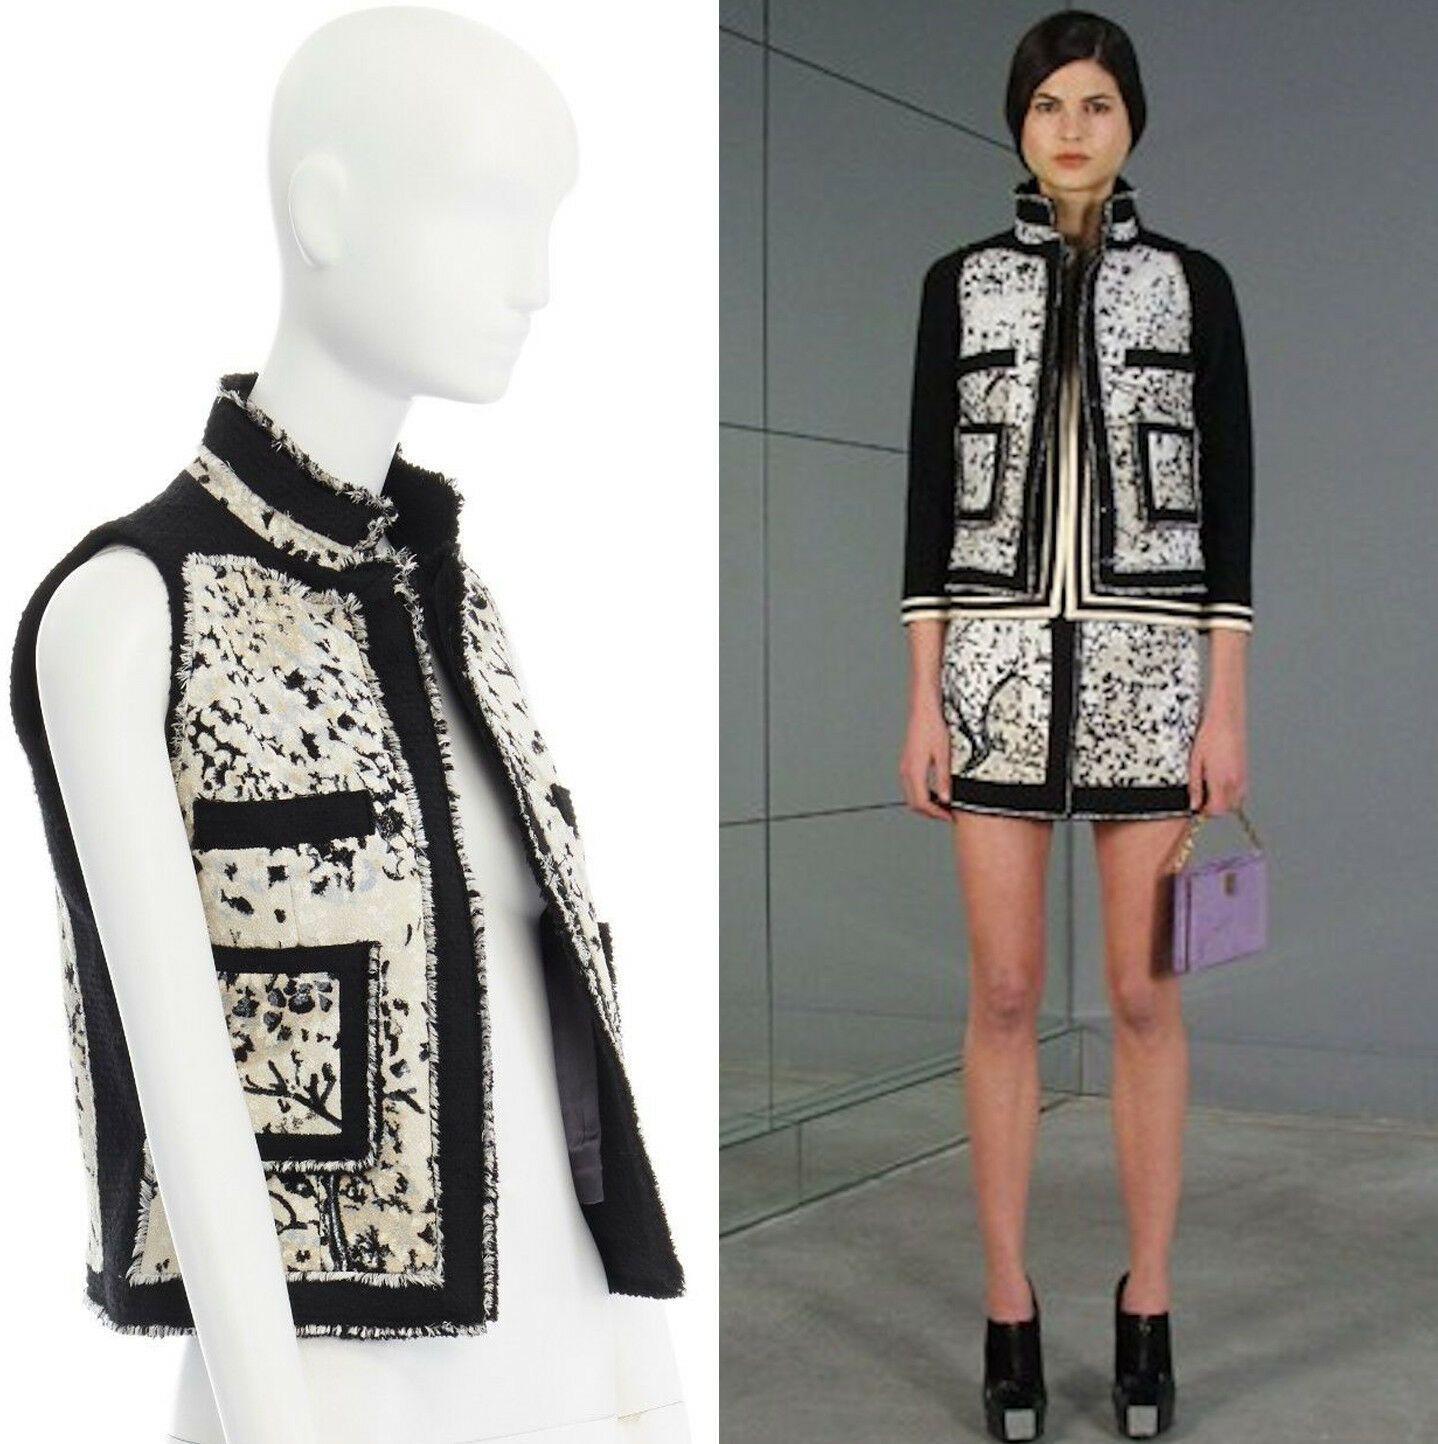 runway BALENCIAGA GHESQUIERE 2008 black white wool jacquard raw edge vest IT38 S

BALENCIAGA by NICOLAS GHESQUIERE

FROM THE PRE-FALL 2008 COLLECTION
BLACK AND MULTICOLOR . ABSTRACT PRINT . TREE BRANCH PRINT ON BACK PANEL . 
FRINGE TRIM . DUAL SLIT